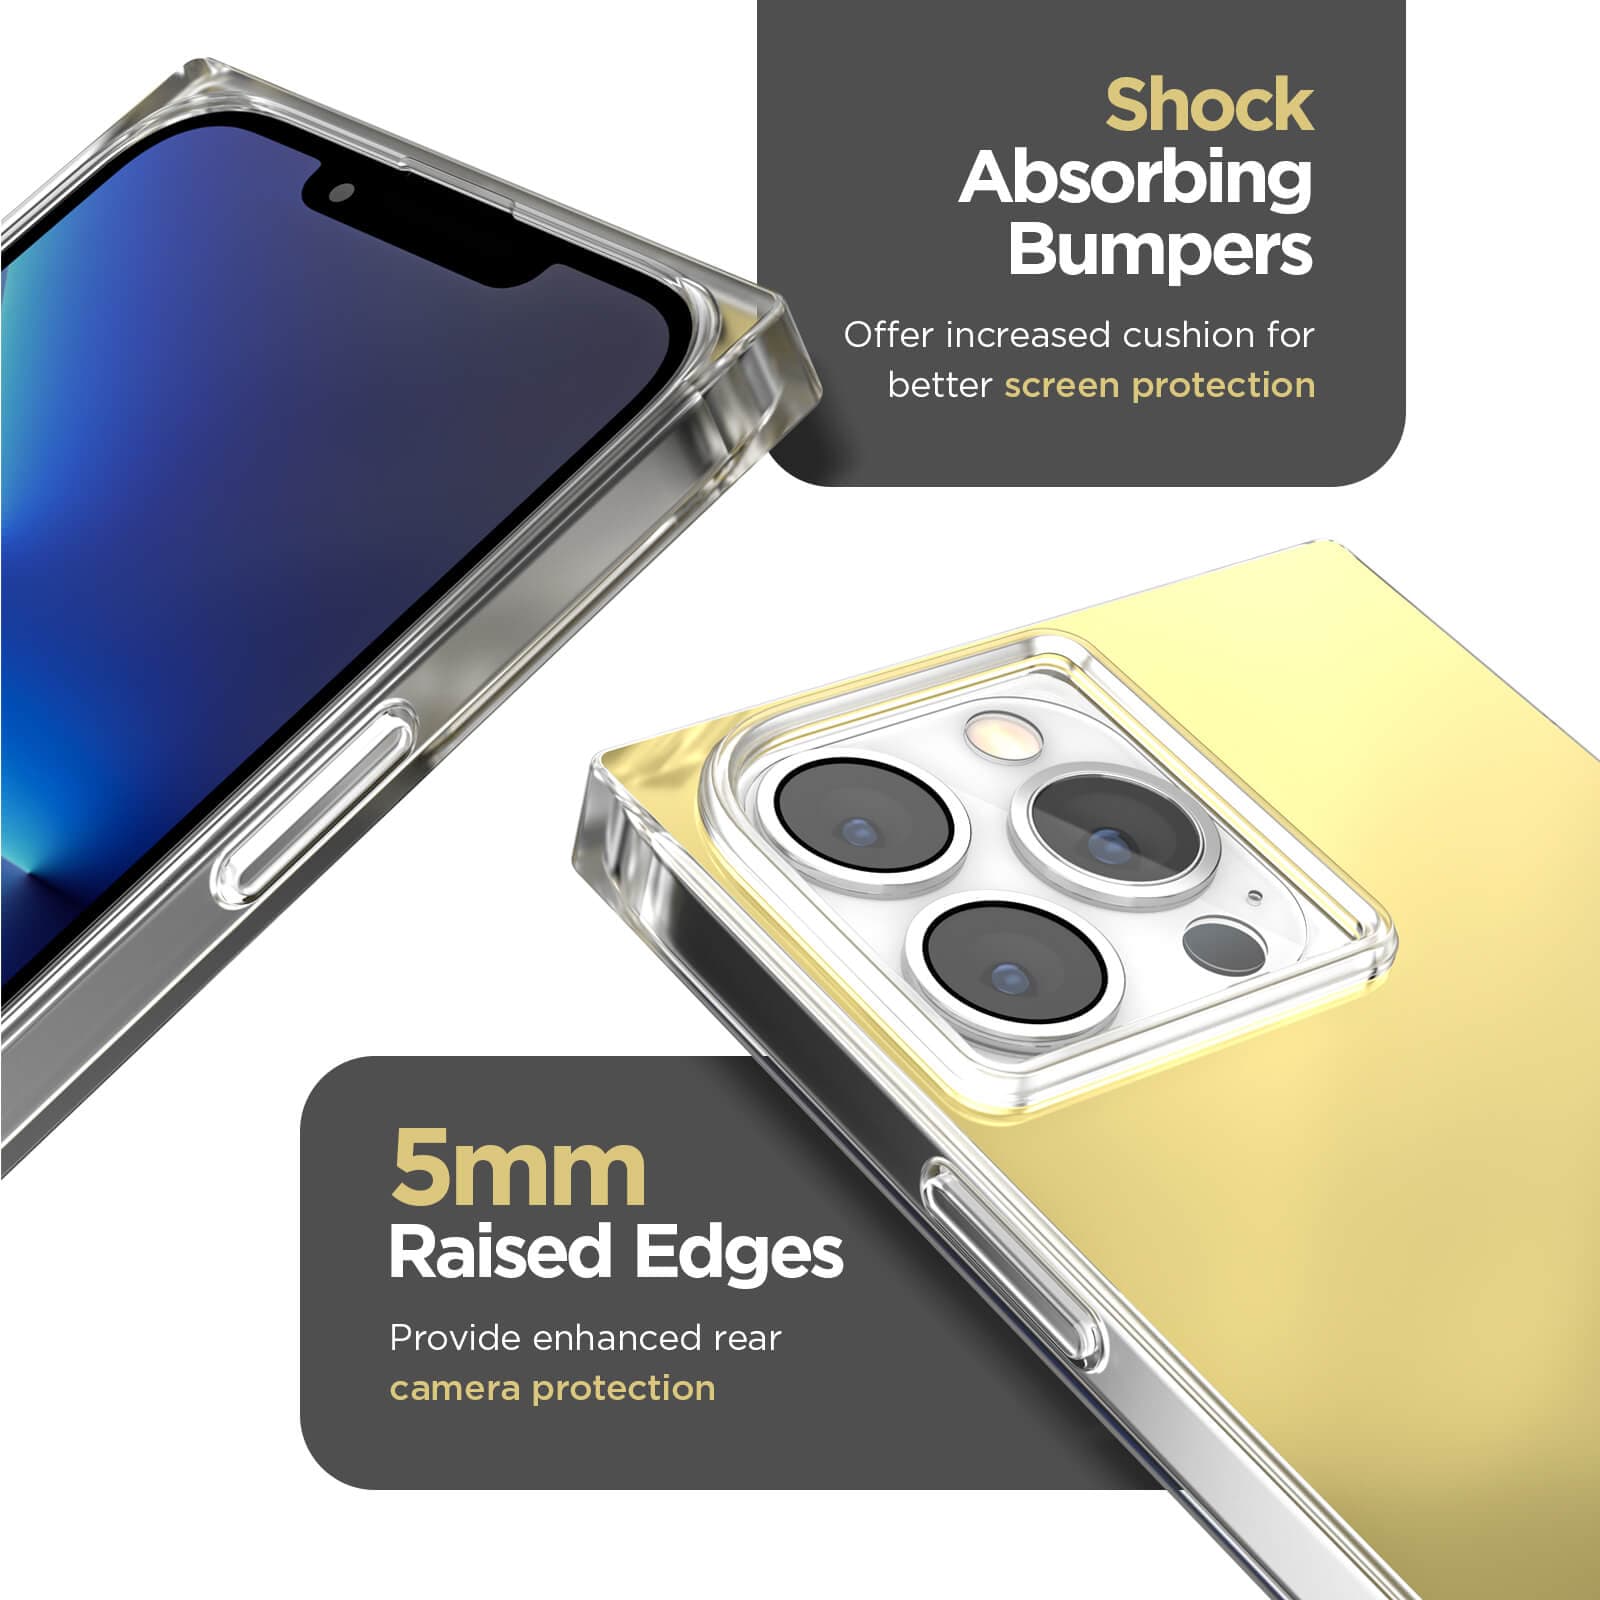 Shock absorbing bumpers offer increased cushion for better screen protection. 5mm raised edges provide enhances rear camera protection. color::Gold